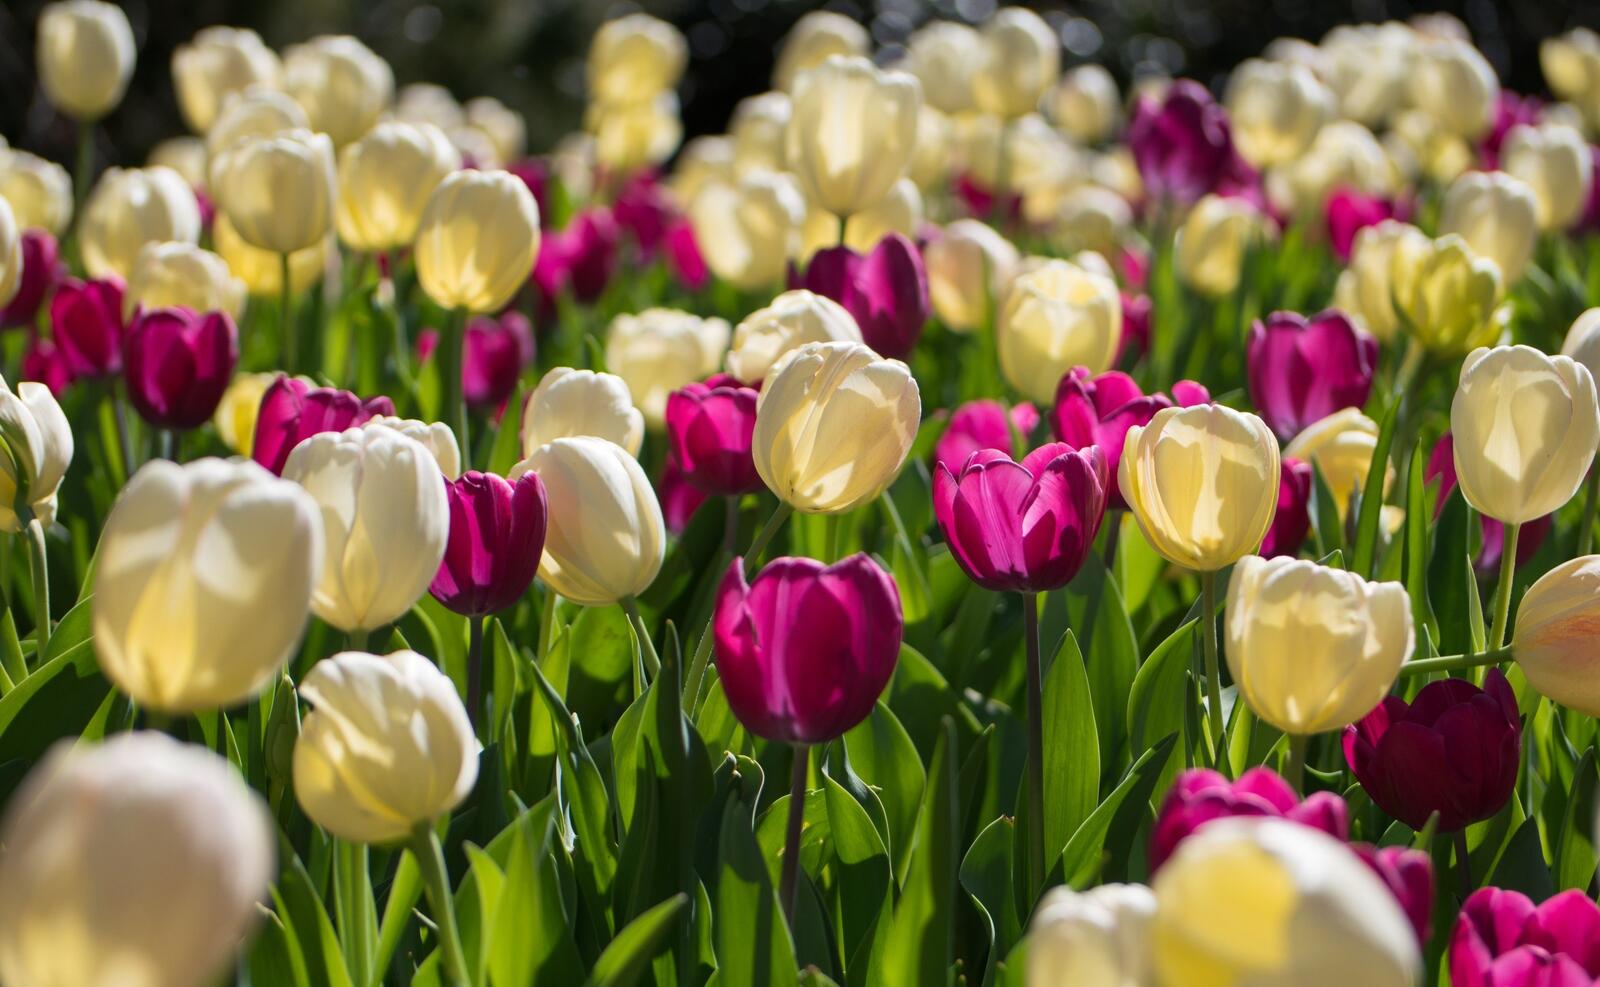 Wallpapers tulips many flowerbed on the desktop